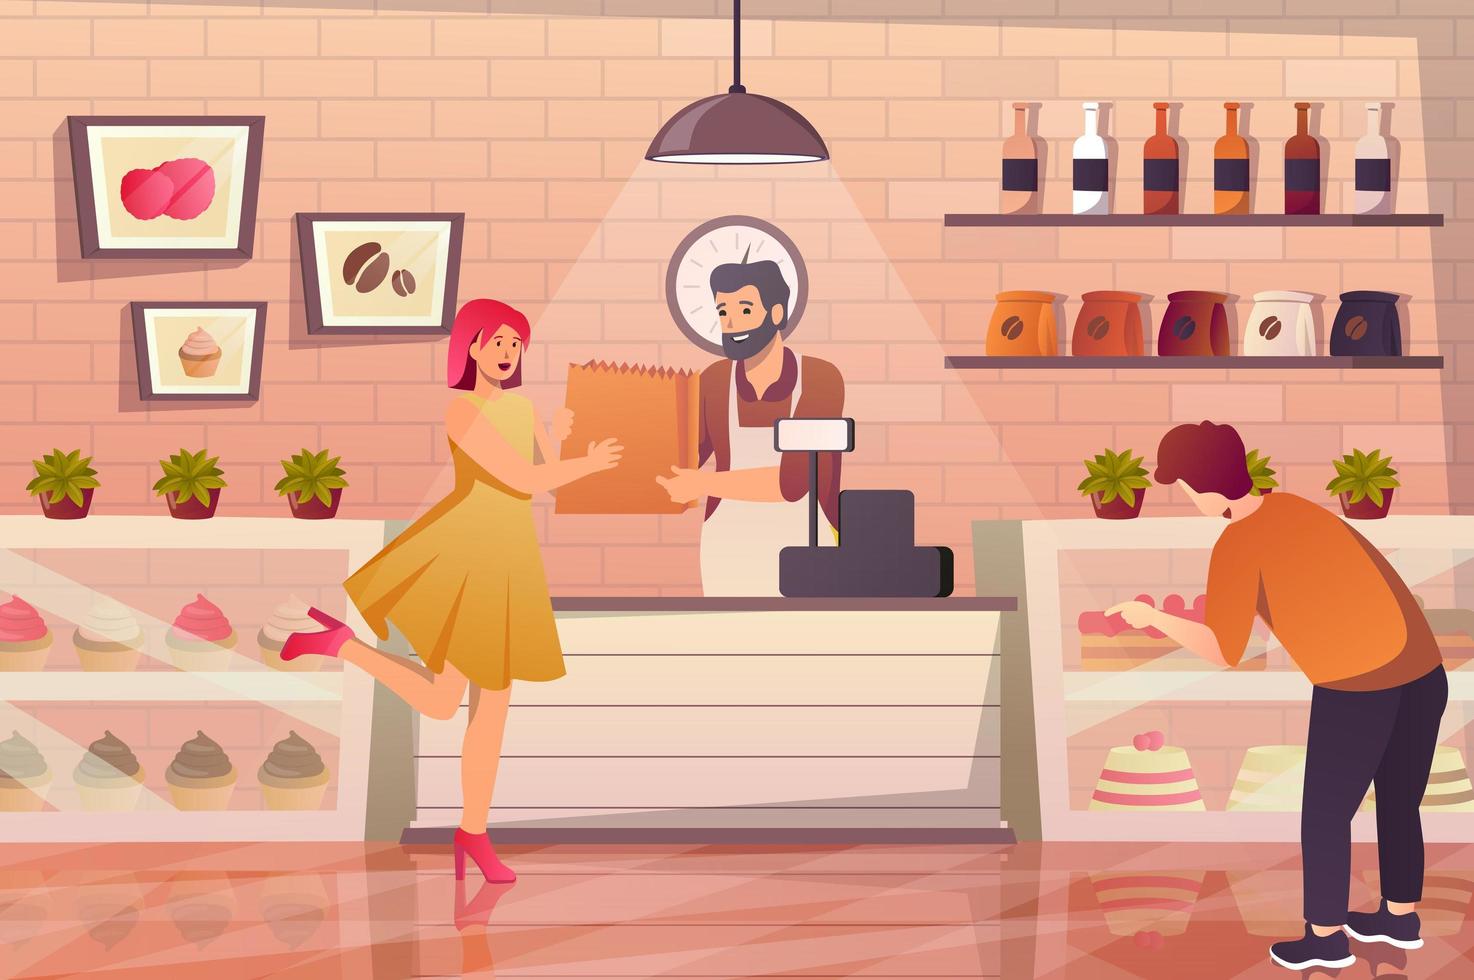 Bakery shop interior with buyers concept in flat cartoon design. Customers choose desserts in showcase and buy fresh pastries at checkout from seller. Vector illustration with people scene background